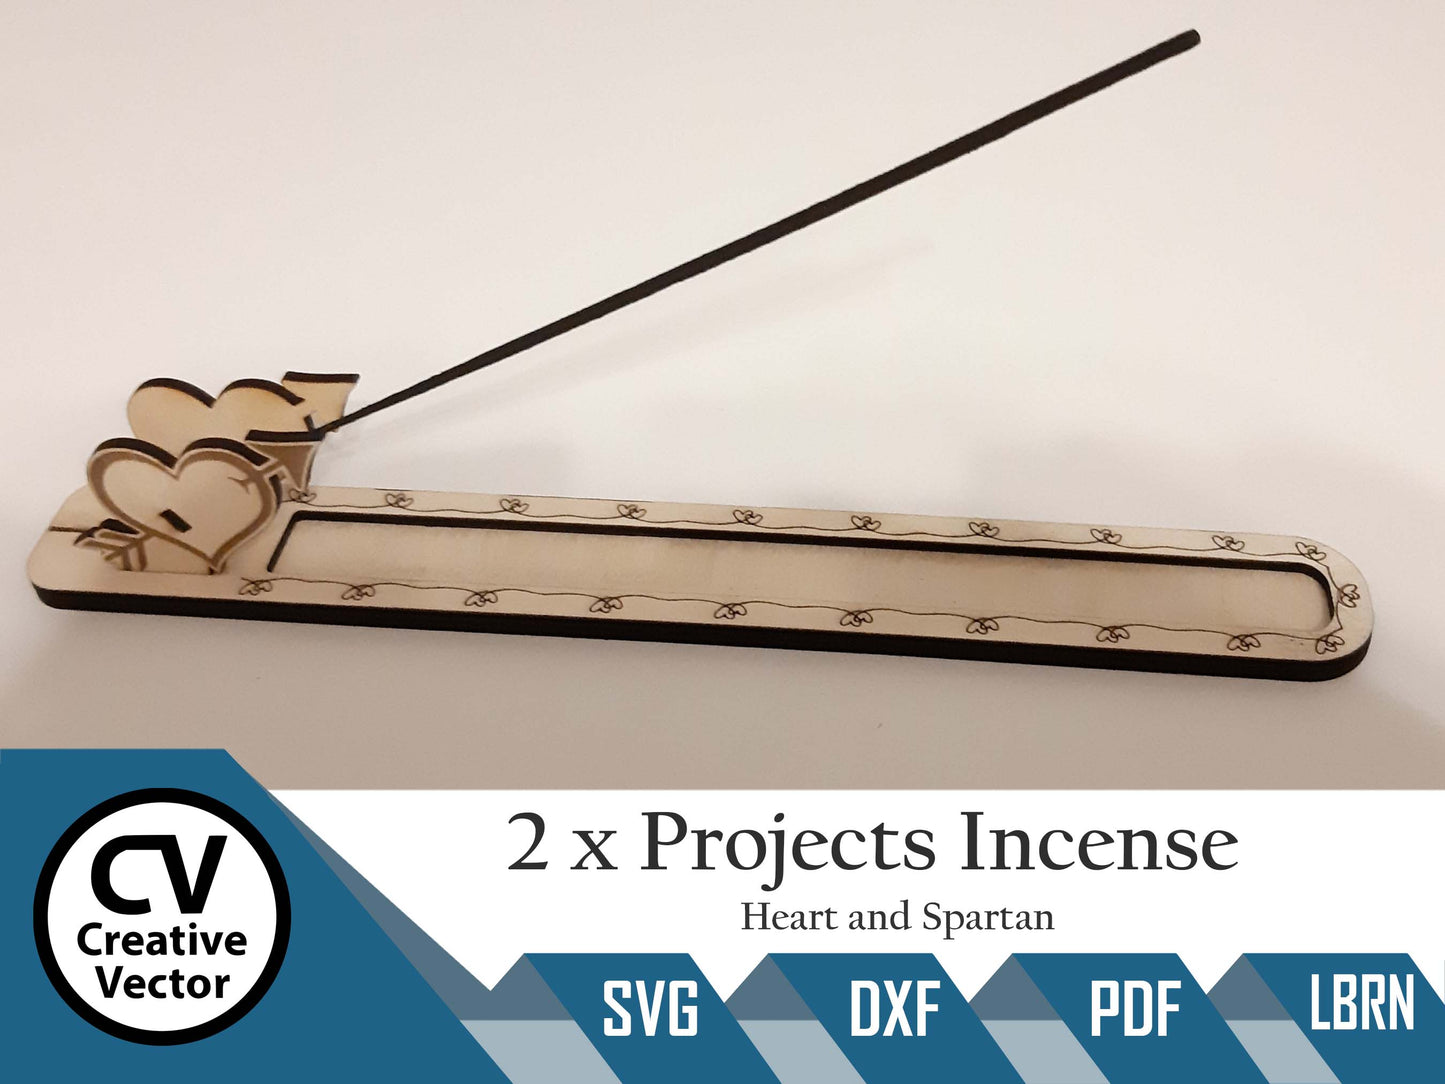 2 x Projects Incense for Valentine's day